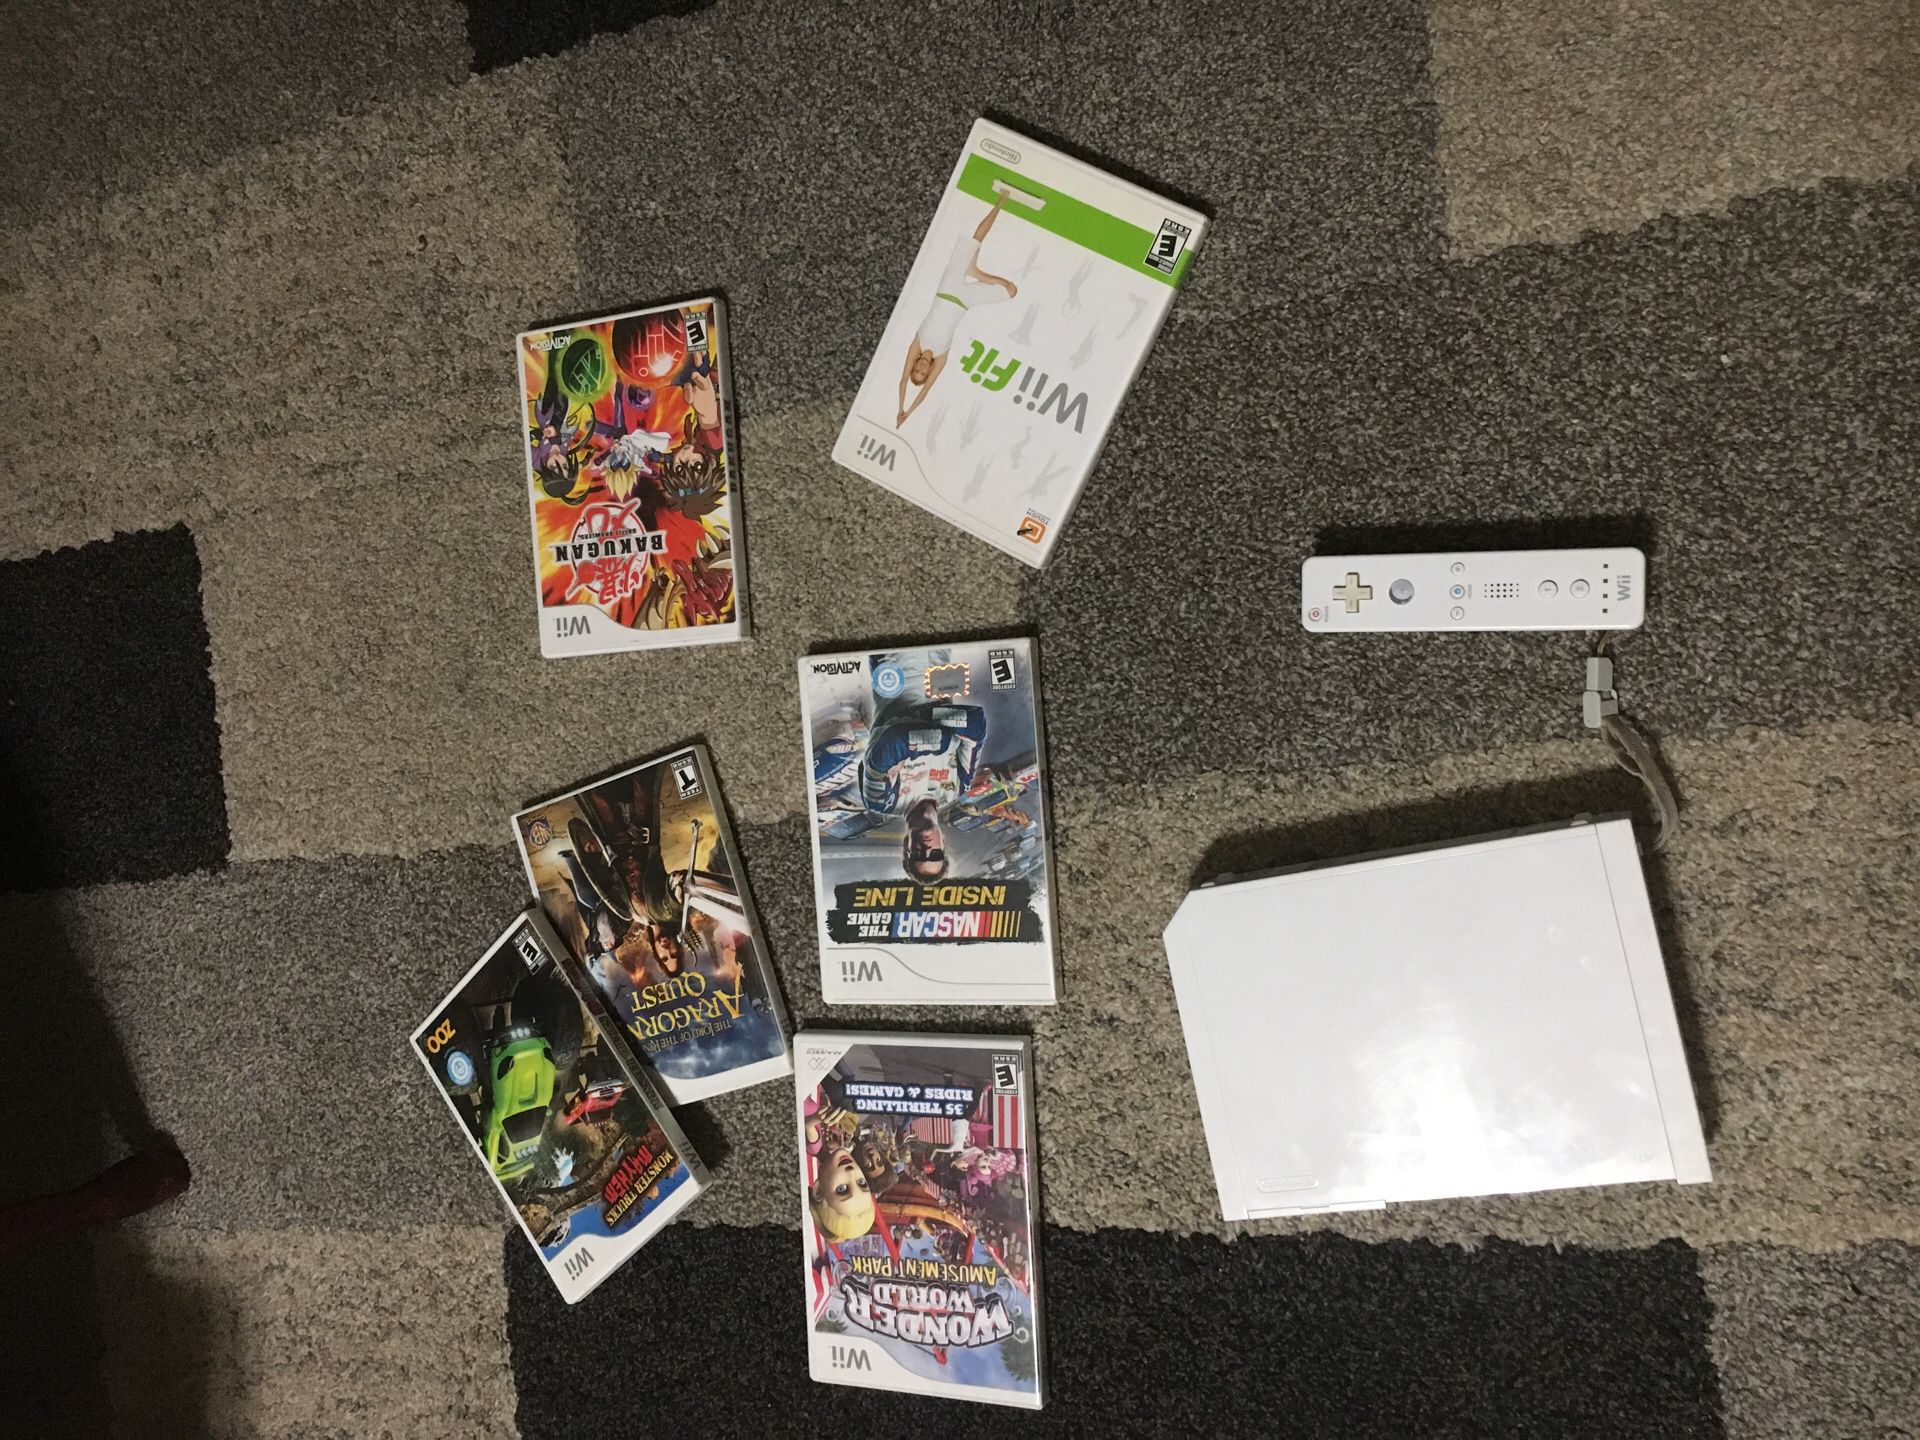 Nintendo Wii with remote and games